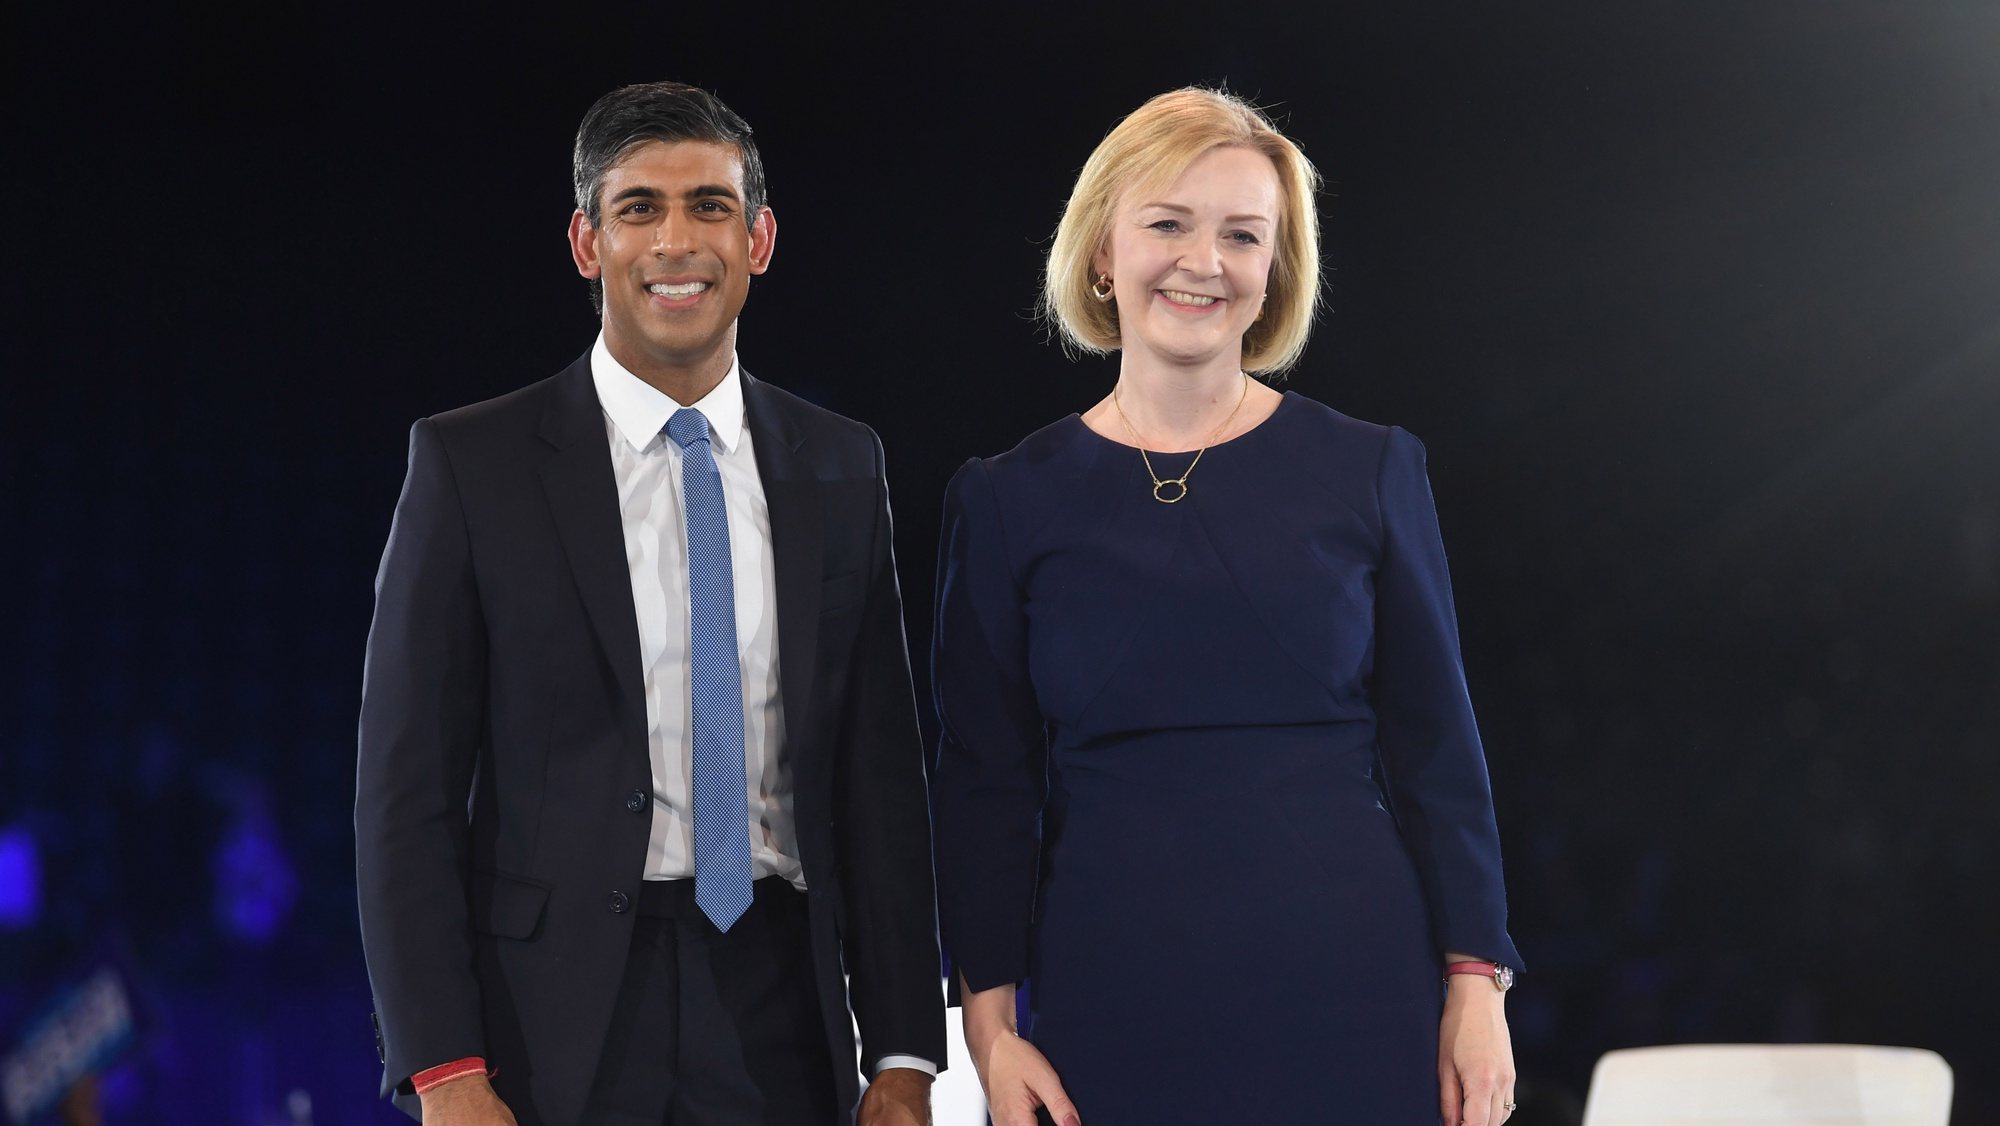 epa10150712 (L-R) Rishi Sunak and Liz Truss at the Conservative Party leadership election hustings at Wembley Arena, London, Britain, 31 August 2022. This is the final hustings attended by Tory Party members who will vote for the new leader and British Prime Minister. The vote closes at 17:00 on the 02 September 2022 and the winner will be announced on 05 September 2022.  EPA/NEIL HALL